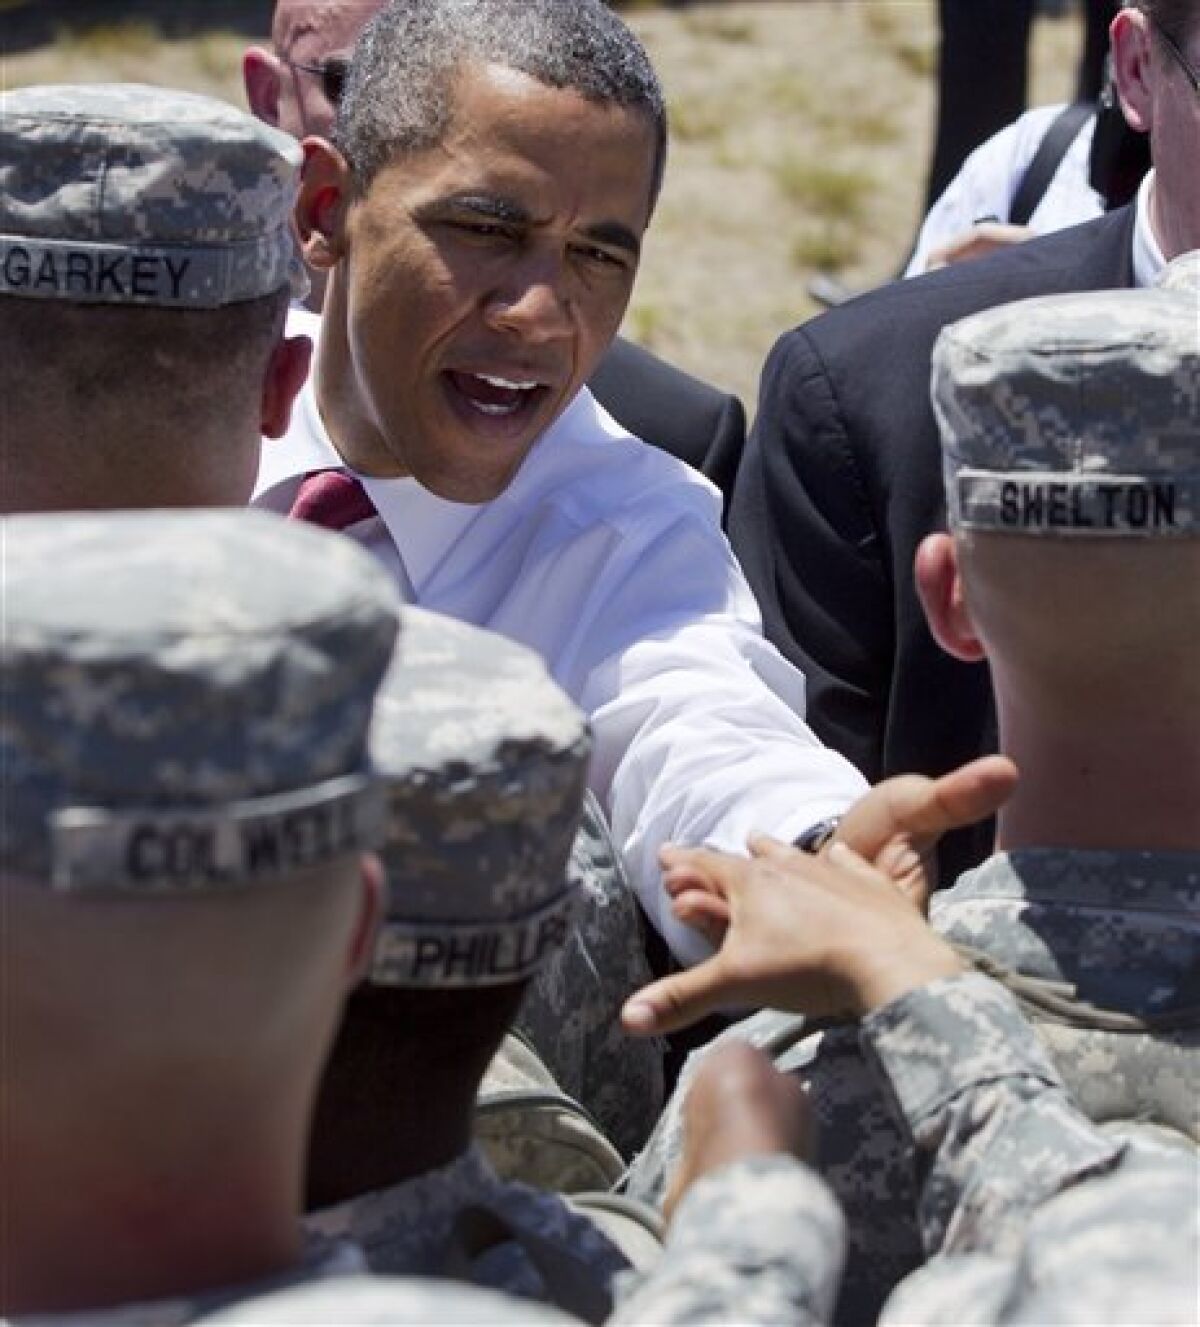 President Barack Obama reaches to shake hands with troops after speaking at the Third Infantry Division Headquarters, Friday, April 27, 2012, at Fort Stewart, Ga. (AP Photo/Carolyn Kaster)